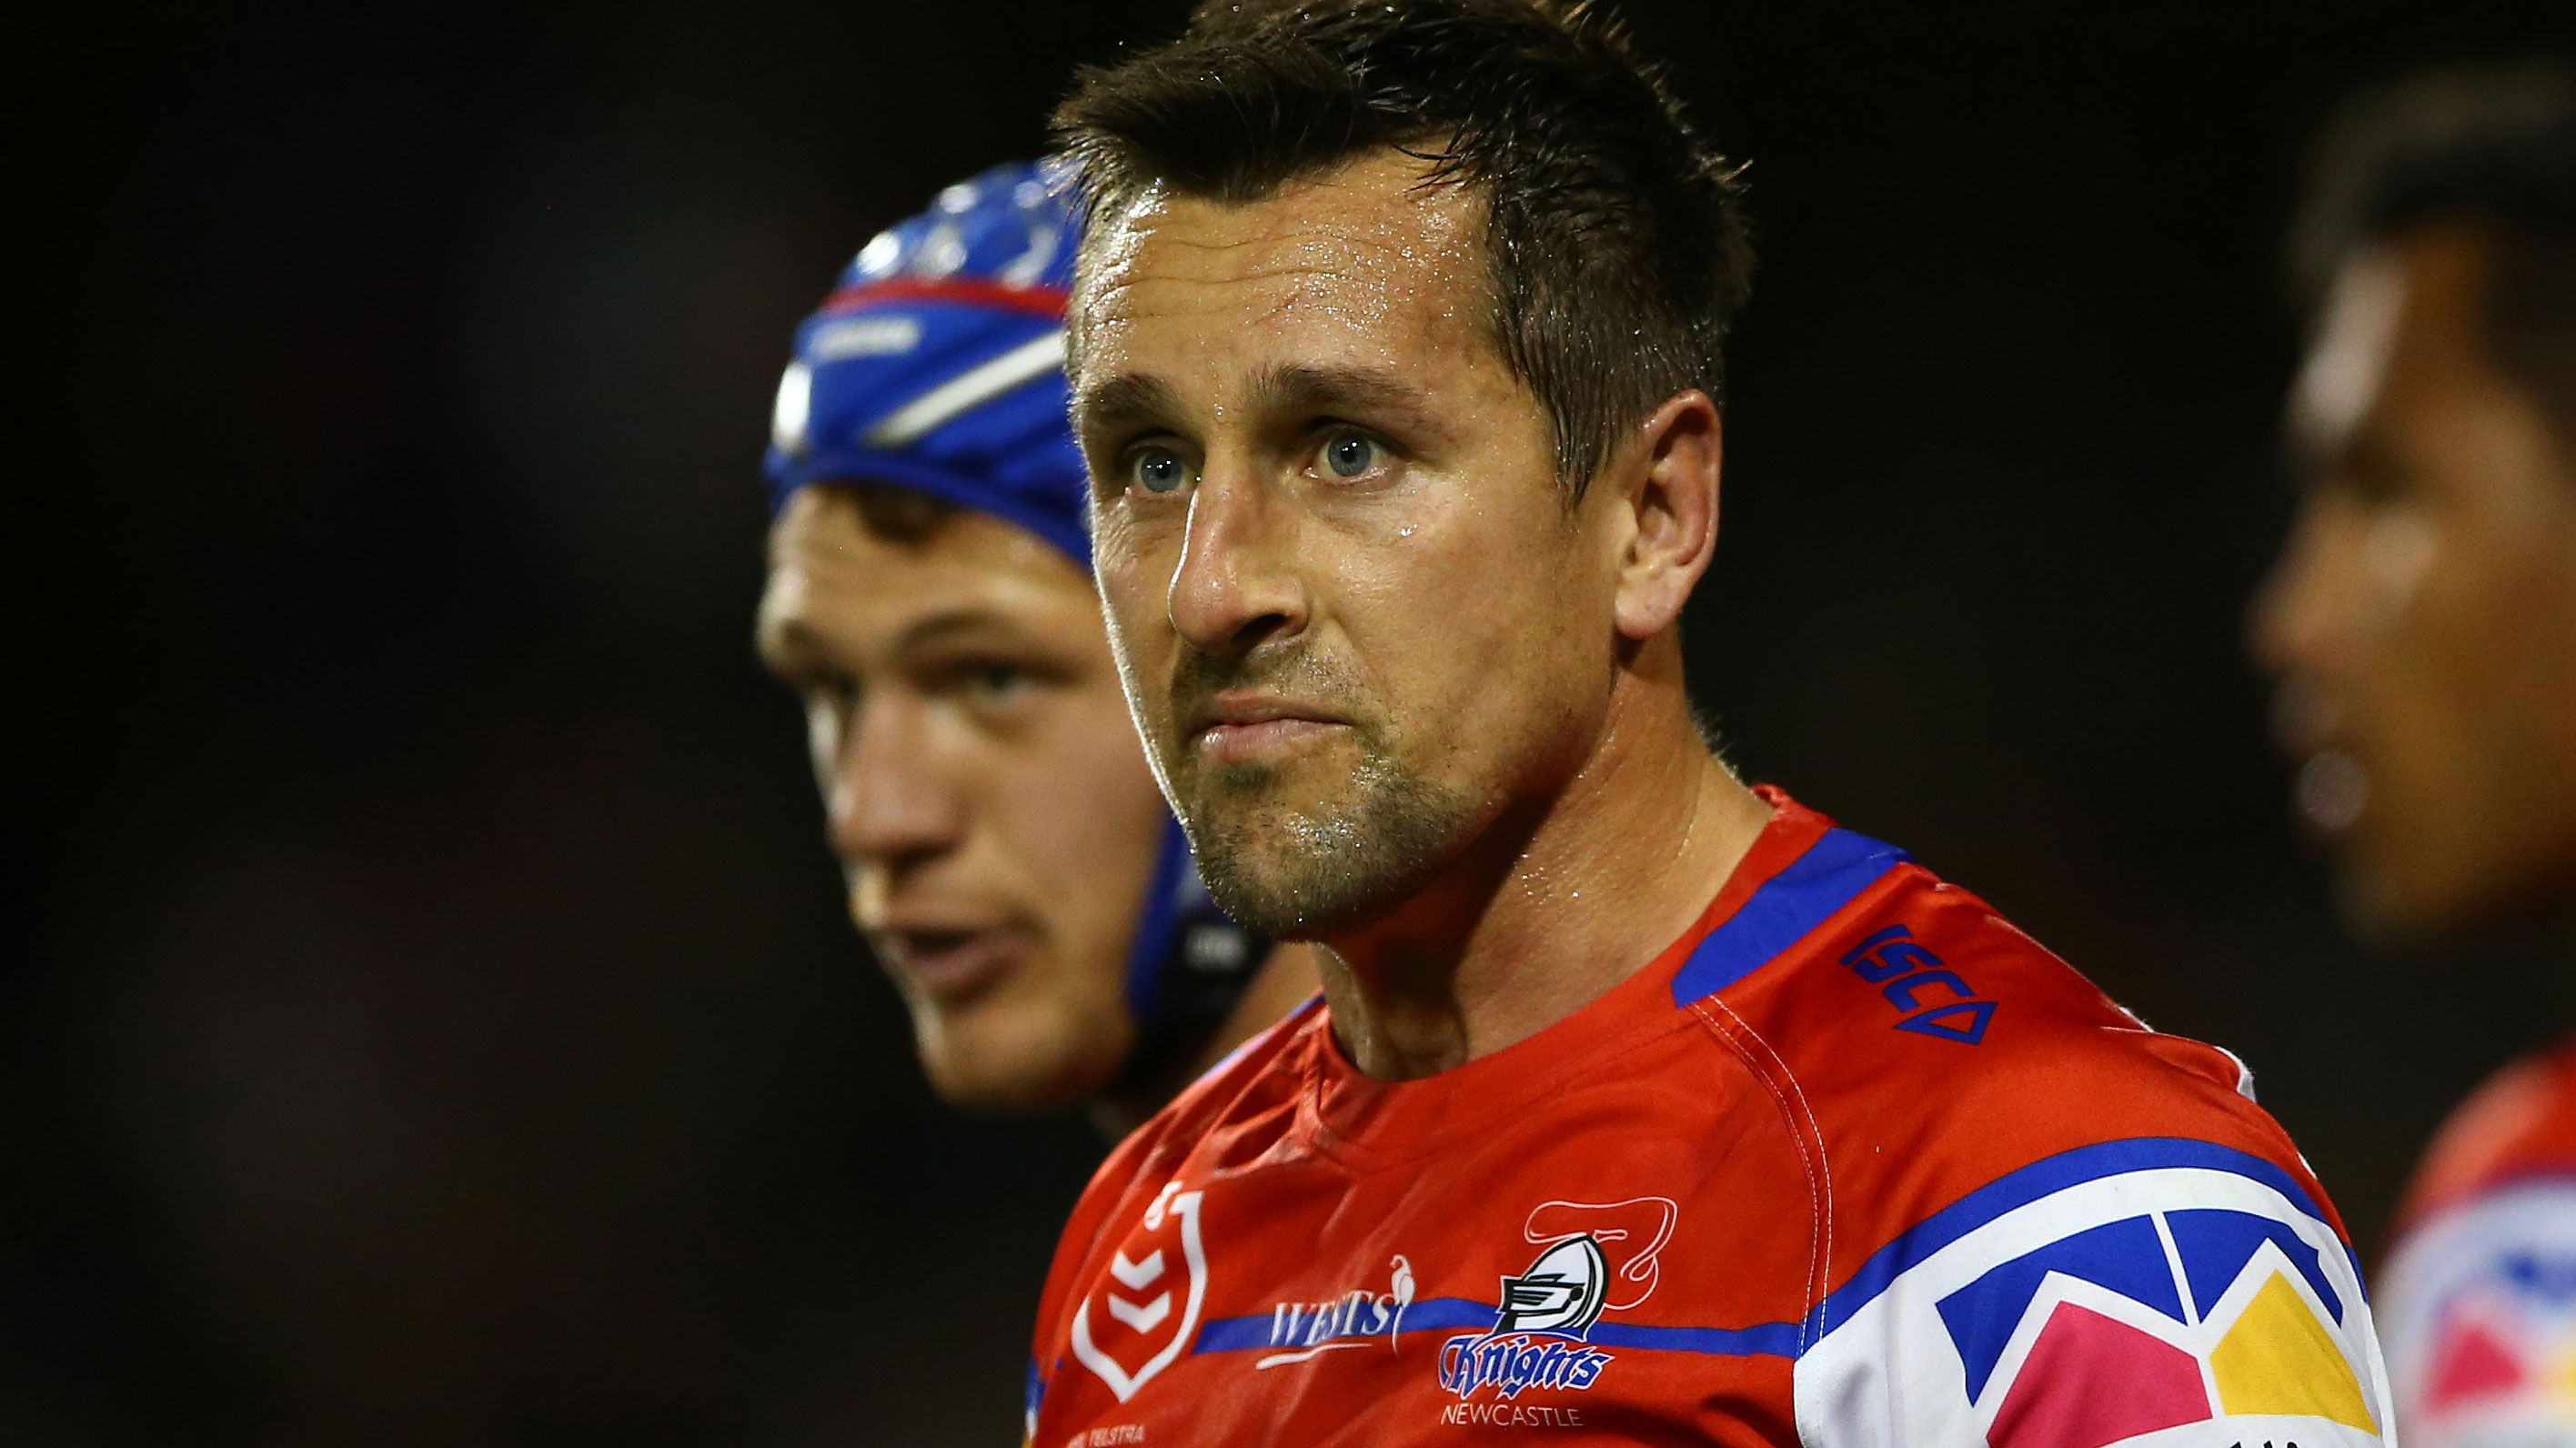 The role Mitchell Pearce played in costing himself $150,000 at Knights